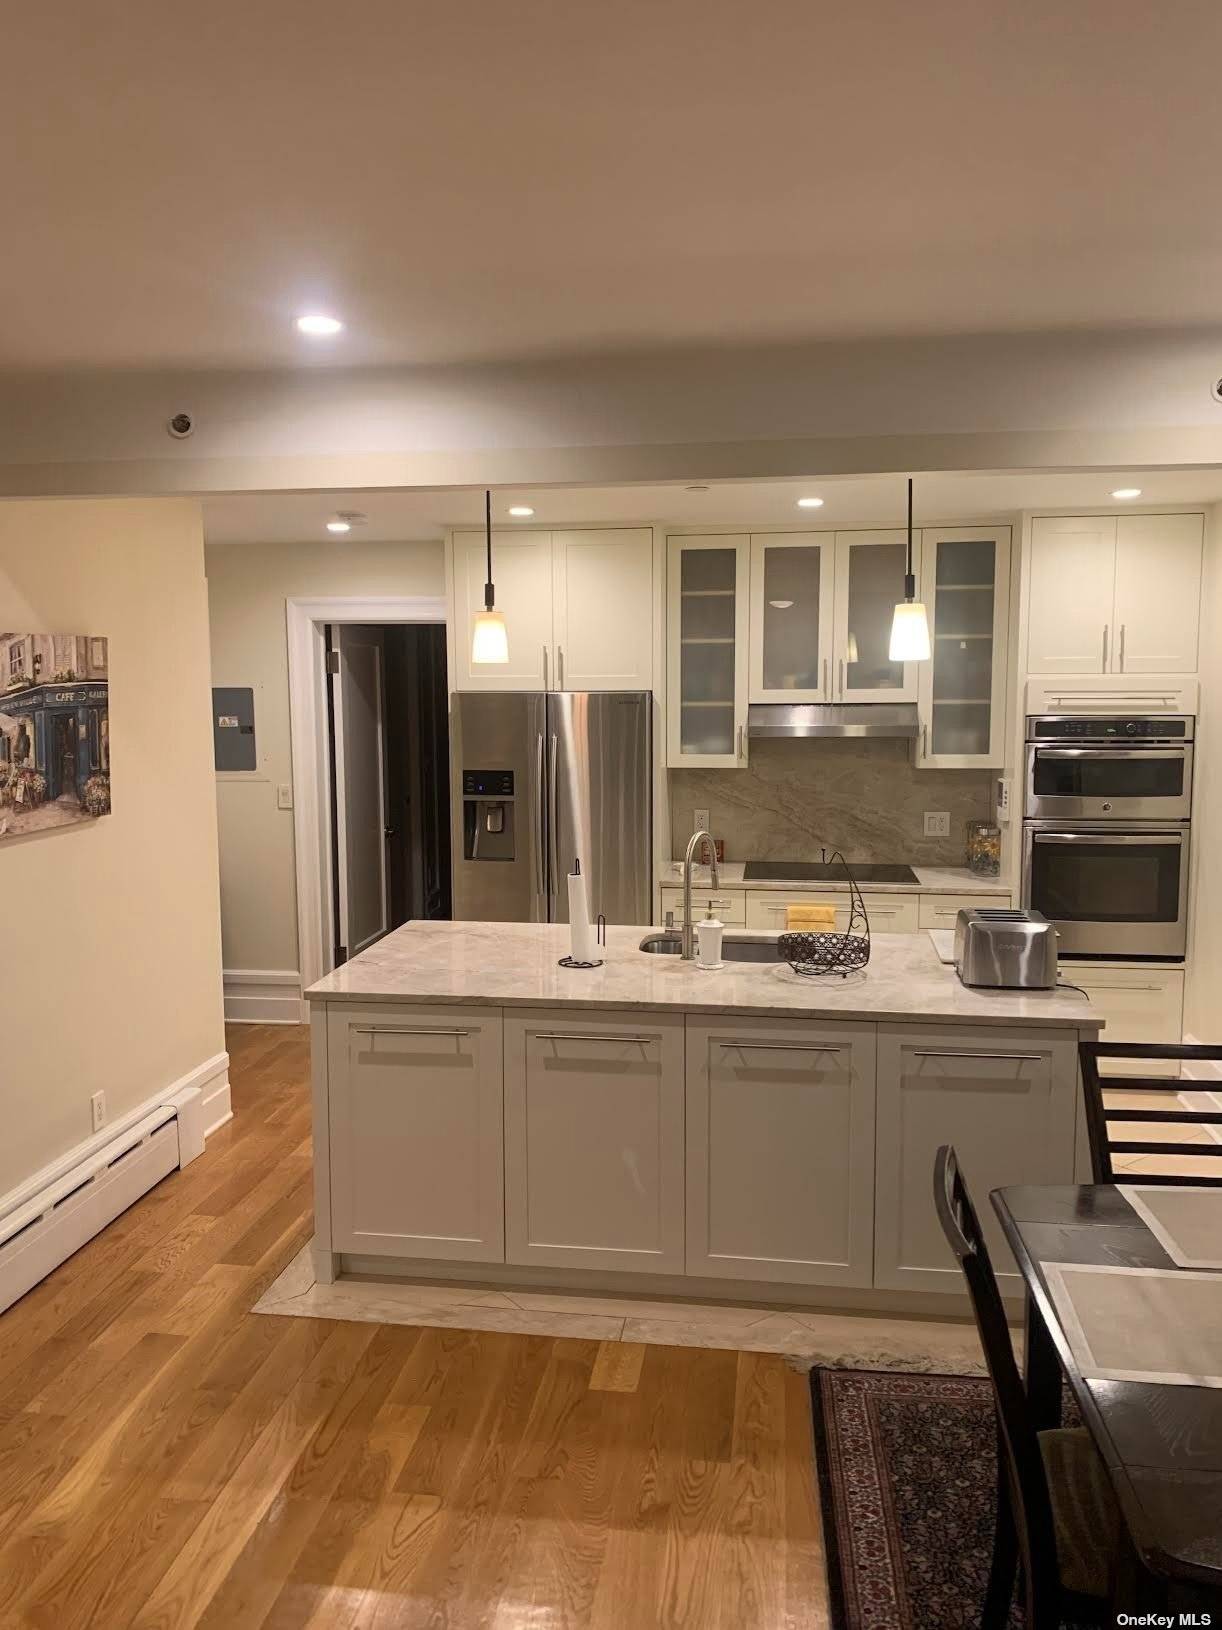 Spacious One Bedroom Garden Apartment in Tranquil Brownstone Discover the comfort and charm of this spacious, fully furnished one bedroom rental apartment on the garden level of a serene brownstone ...